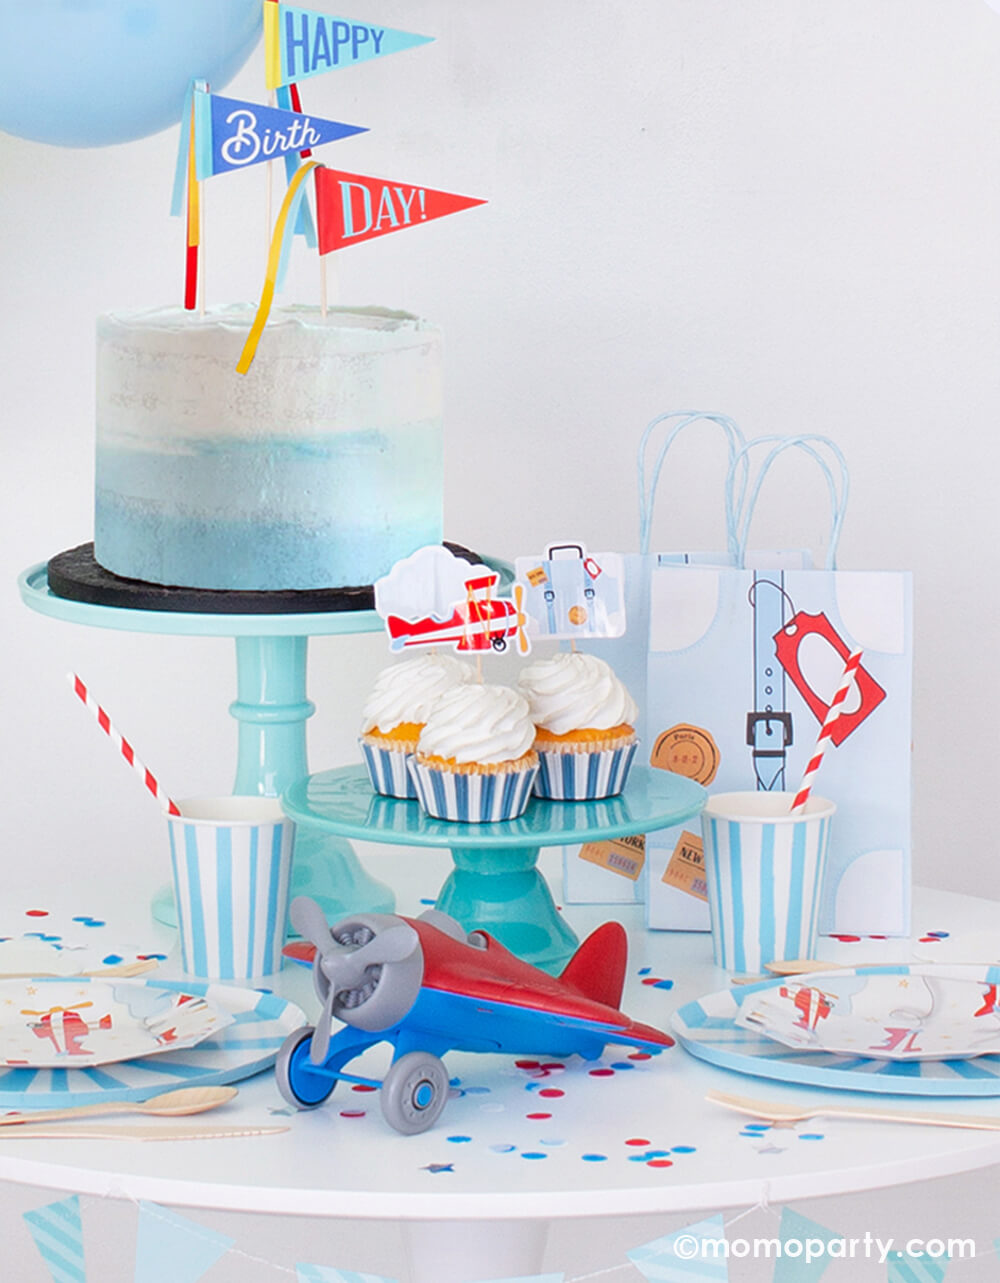 Airplane themed party with a light blue naked cake on a blue cake stand, a airplane toy, Airplane Small Plates layered with blue stripe plates, cupcakes decorated with Airplane Toppers, Airplane Party Bags and confetti on the table. Super cute set up for a airplane birthday party